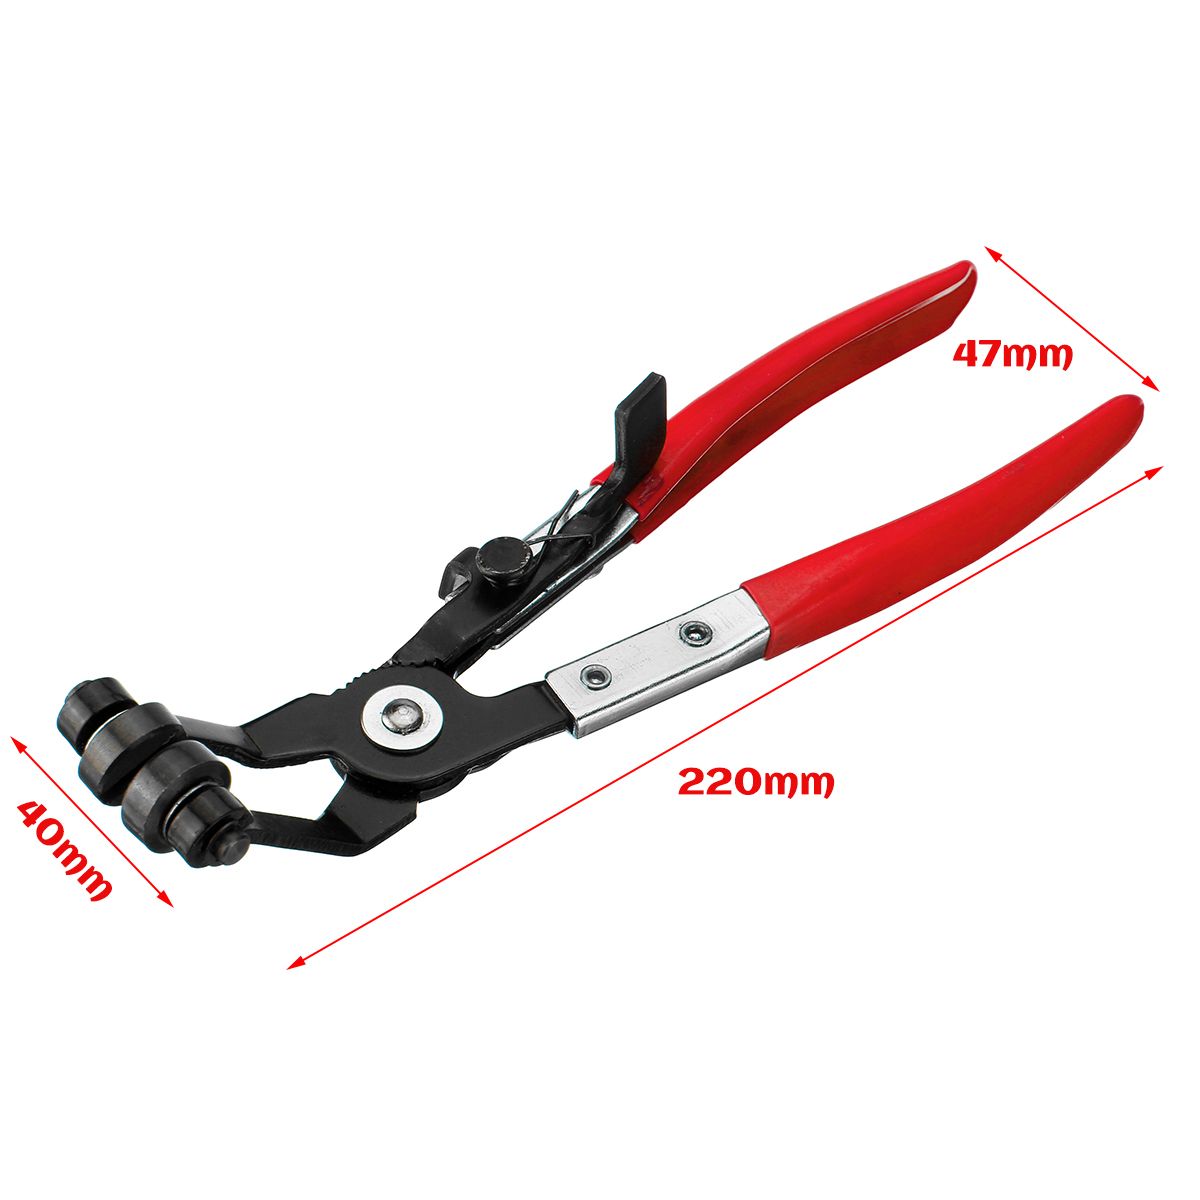 Angled-45deg-Pipe-Hose-Clamp-Pliers-Tool-Fuel-Coolant-Hose-Locking-Clip-Automobile-Removal-Tool-1424367